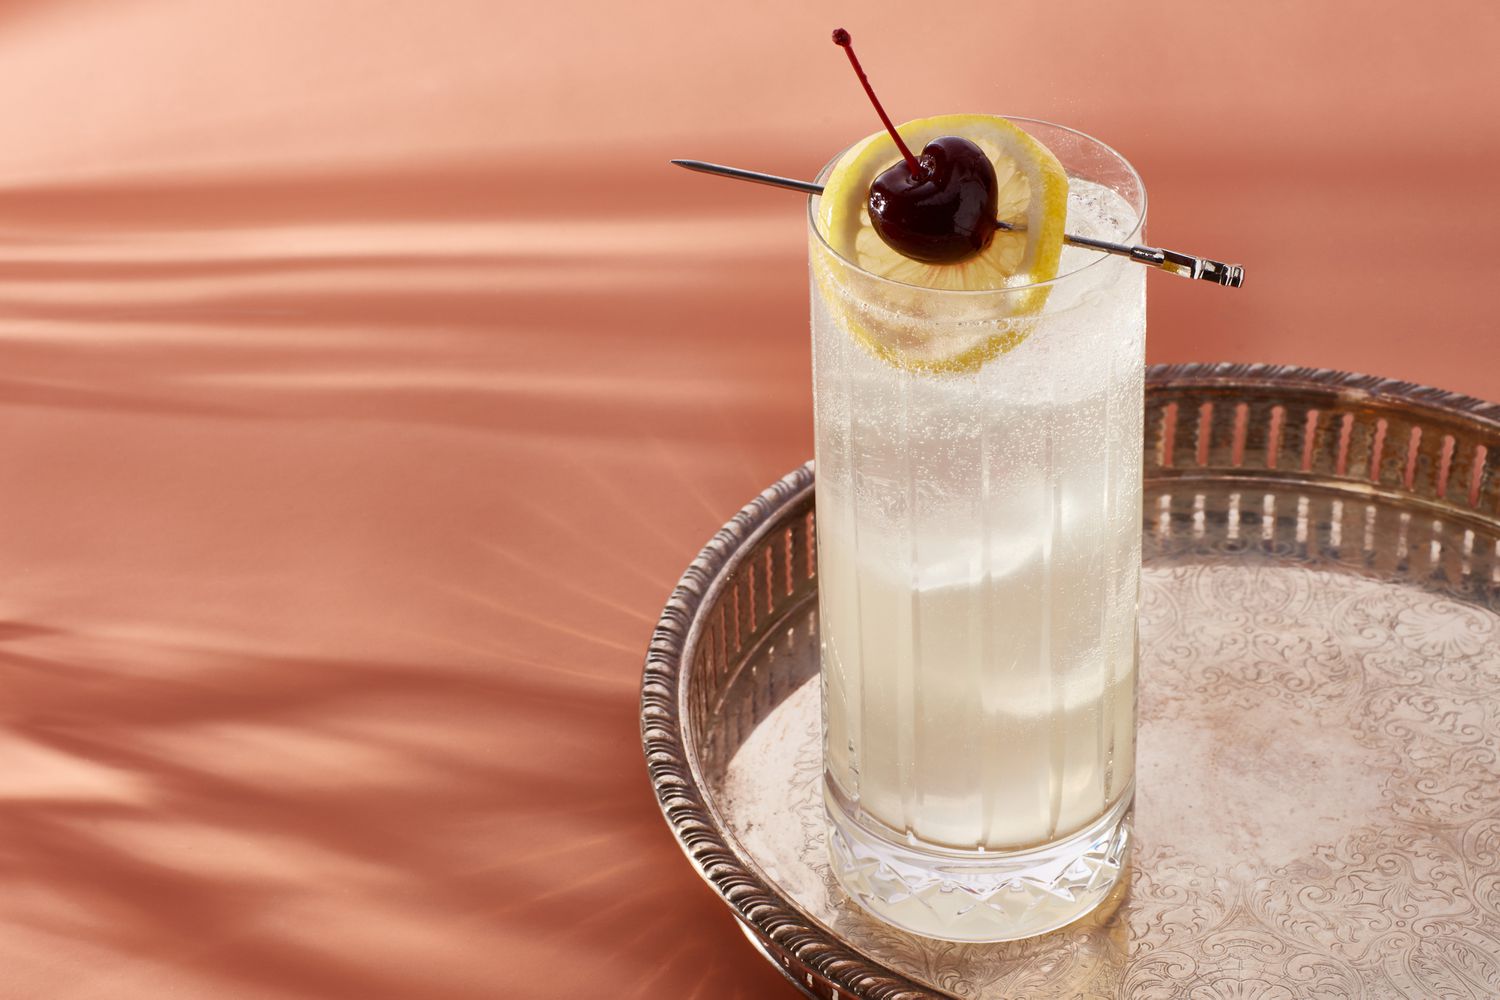 Tom Collins is a cocktail that uses gin as its liquor base, with lemon juice, simple syrup, and club soda